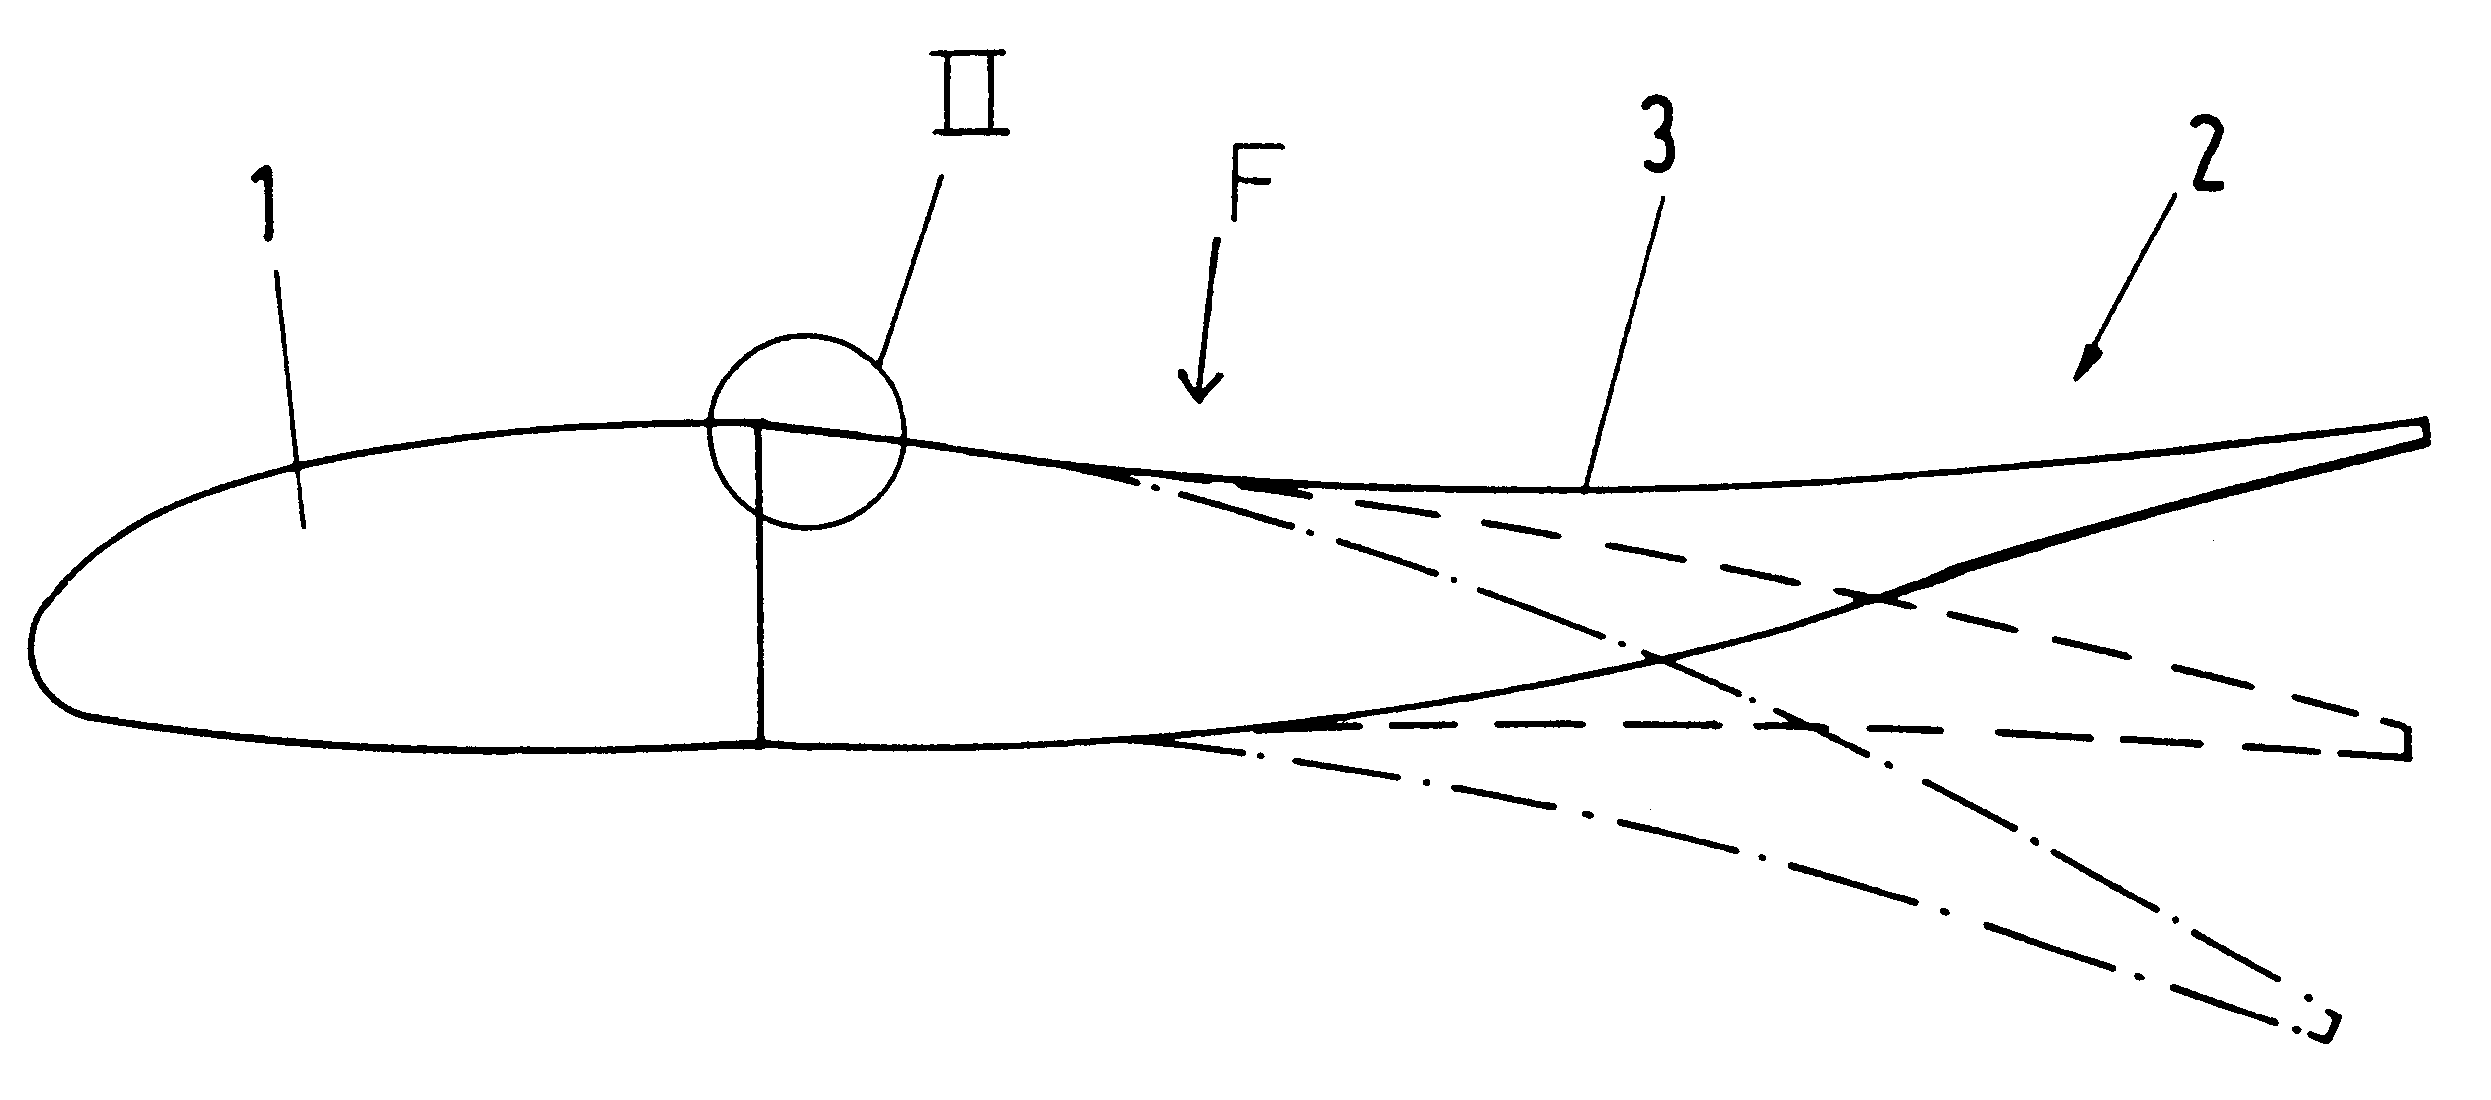 Load carrying structure having variable flexibility